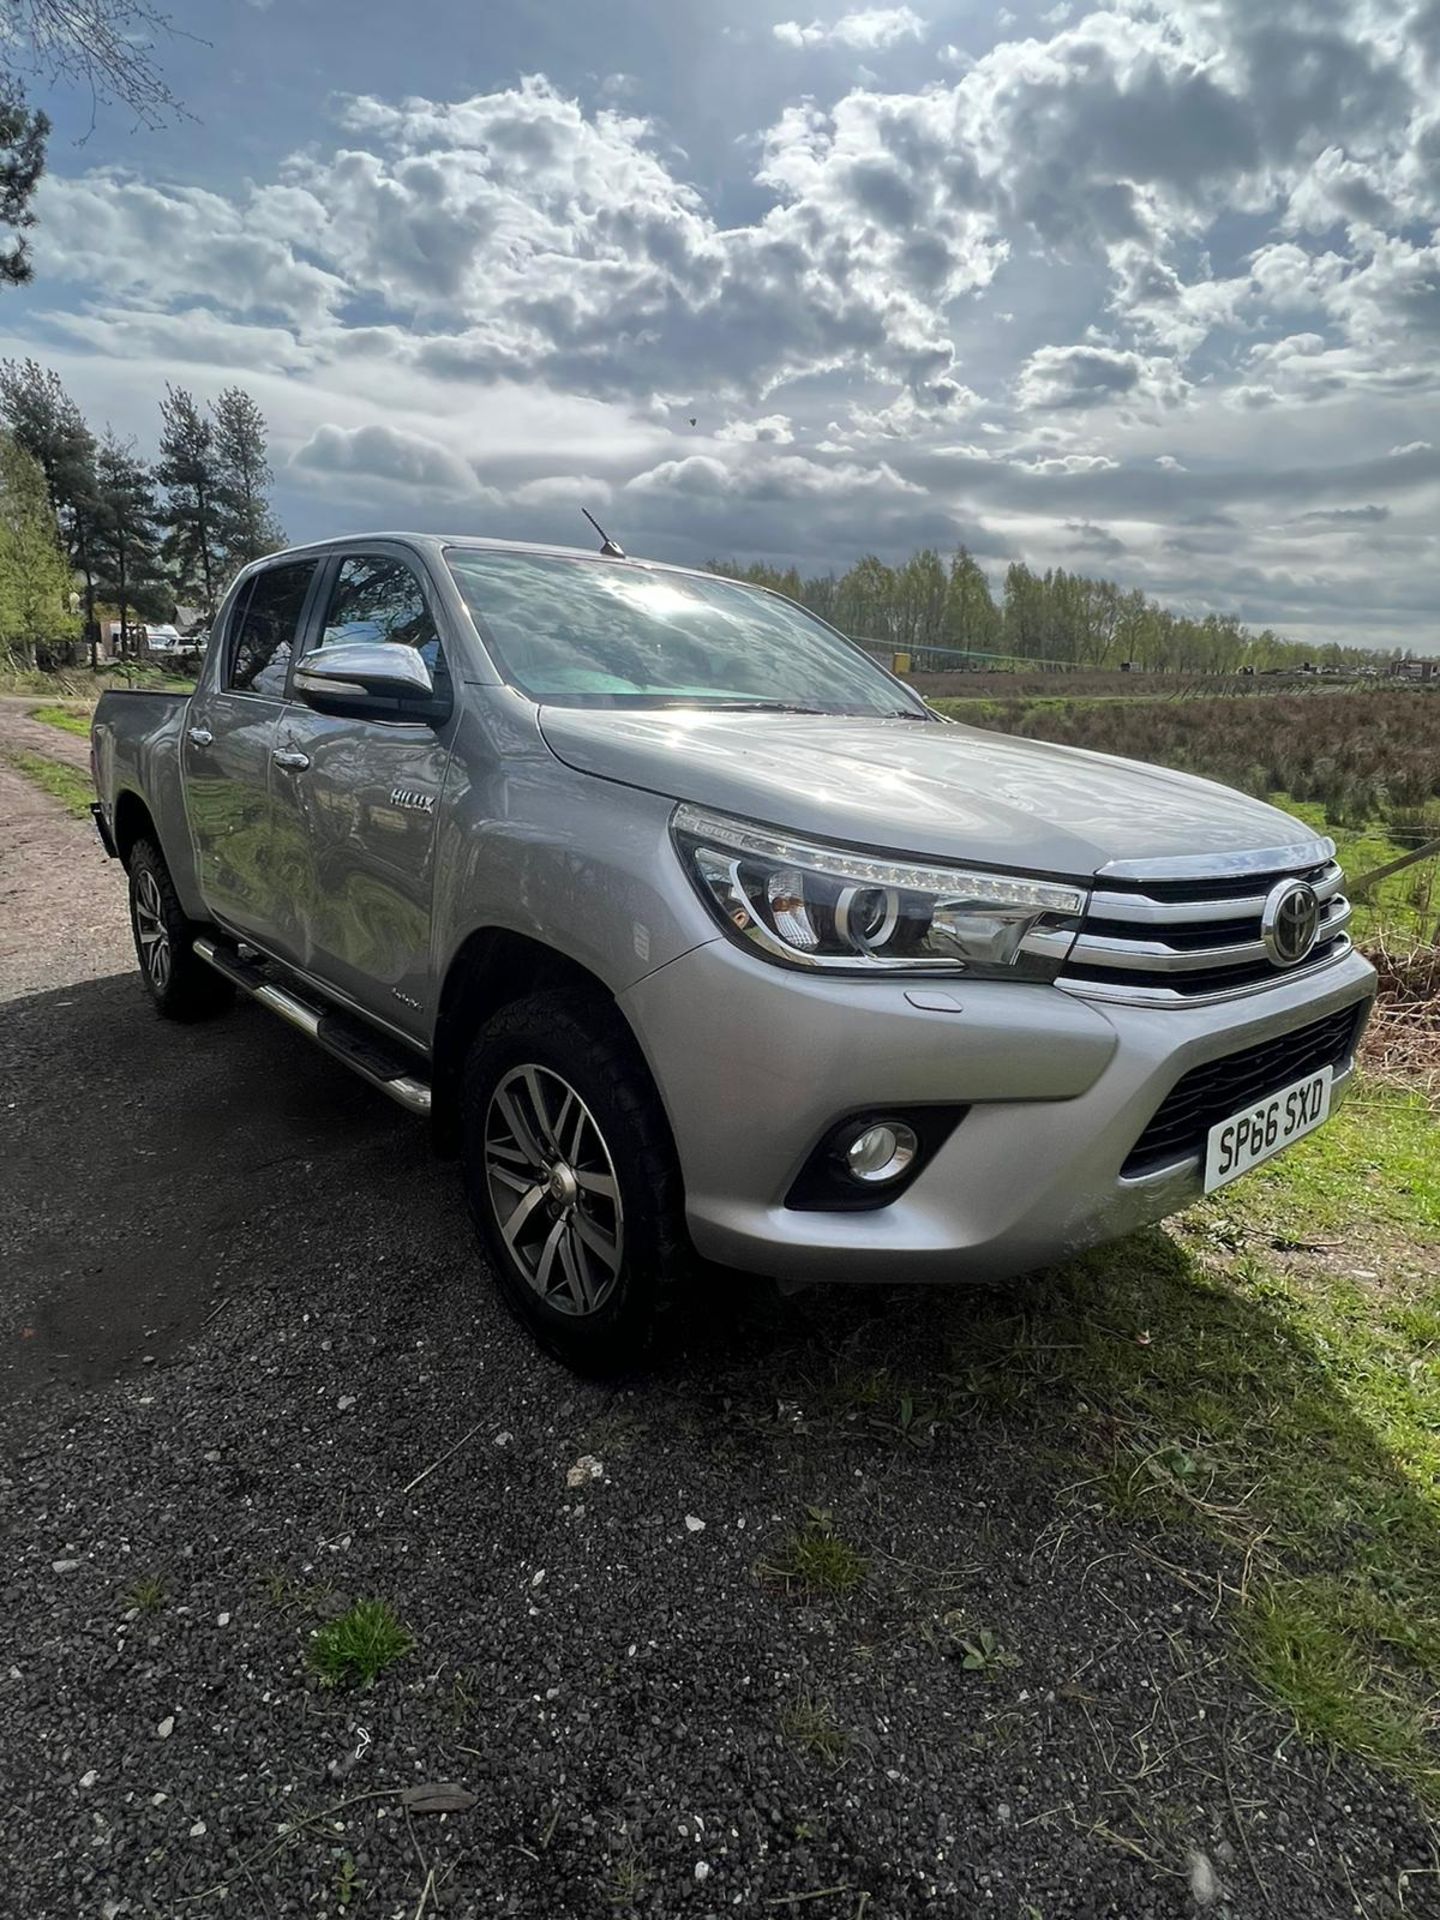 TOYOTA HILUX INVINCIBLE - Image 2 of 25